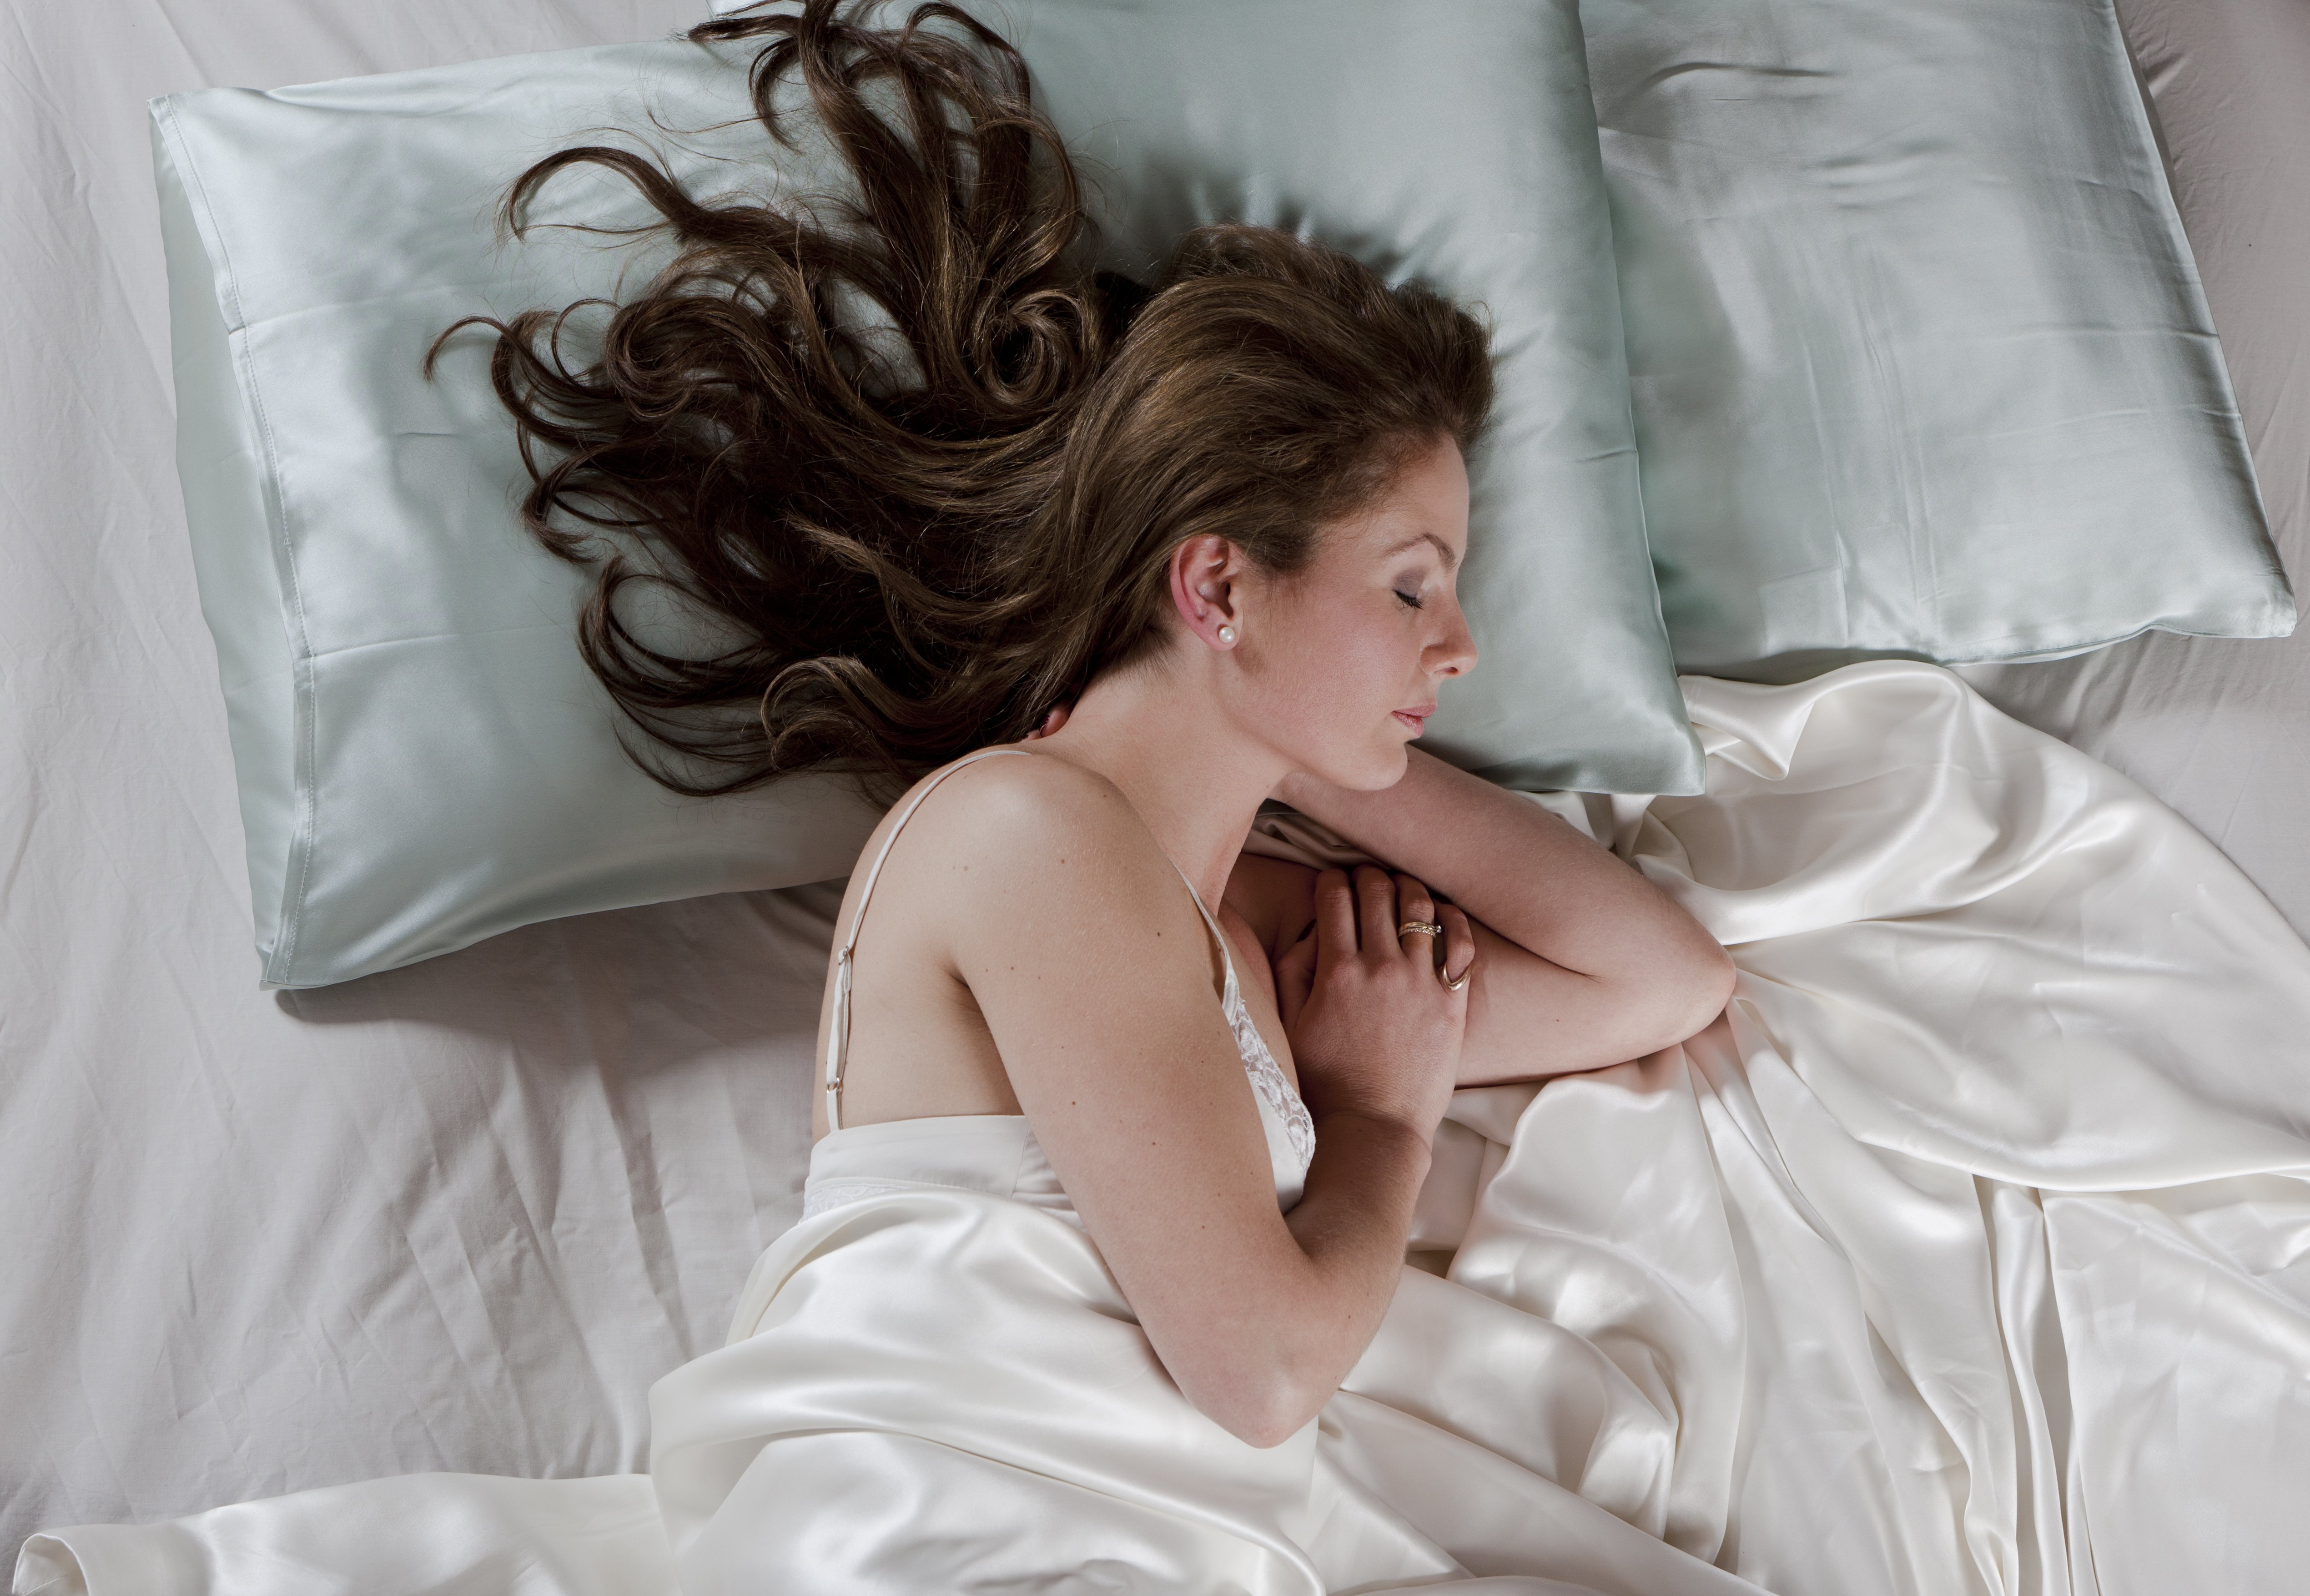 Woman sleeping on a satin pillow. | Source: Getty Images